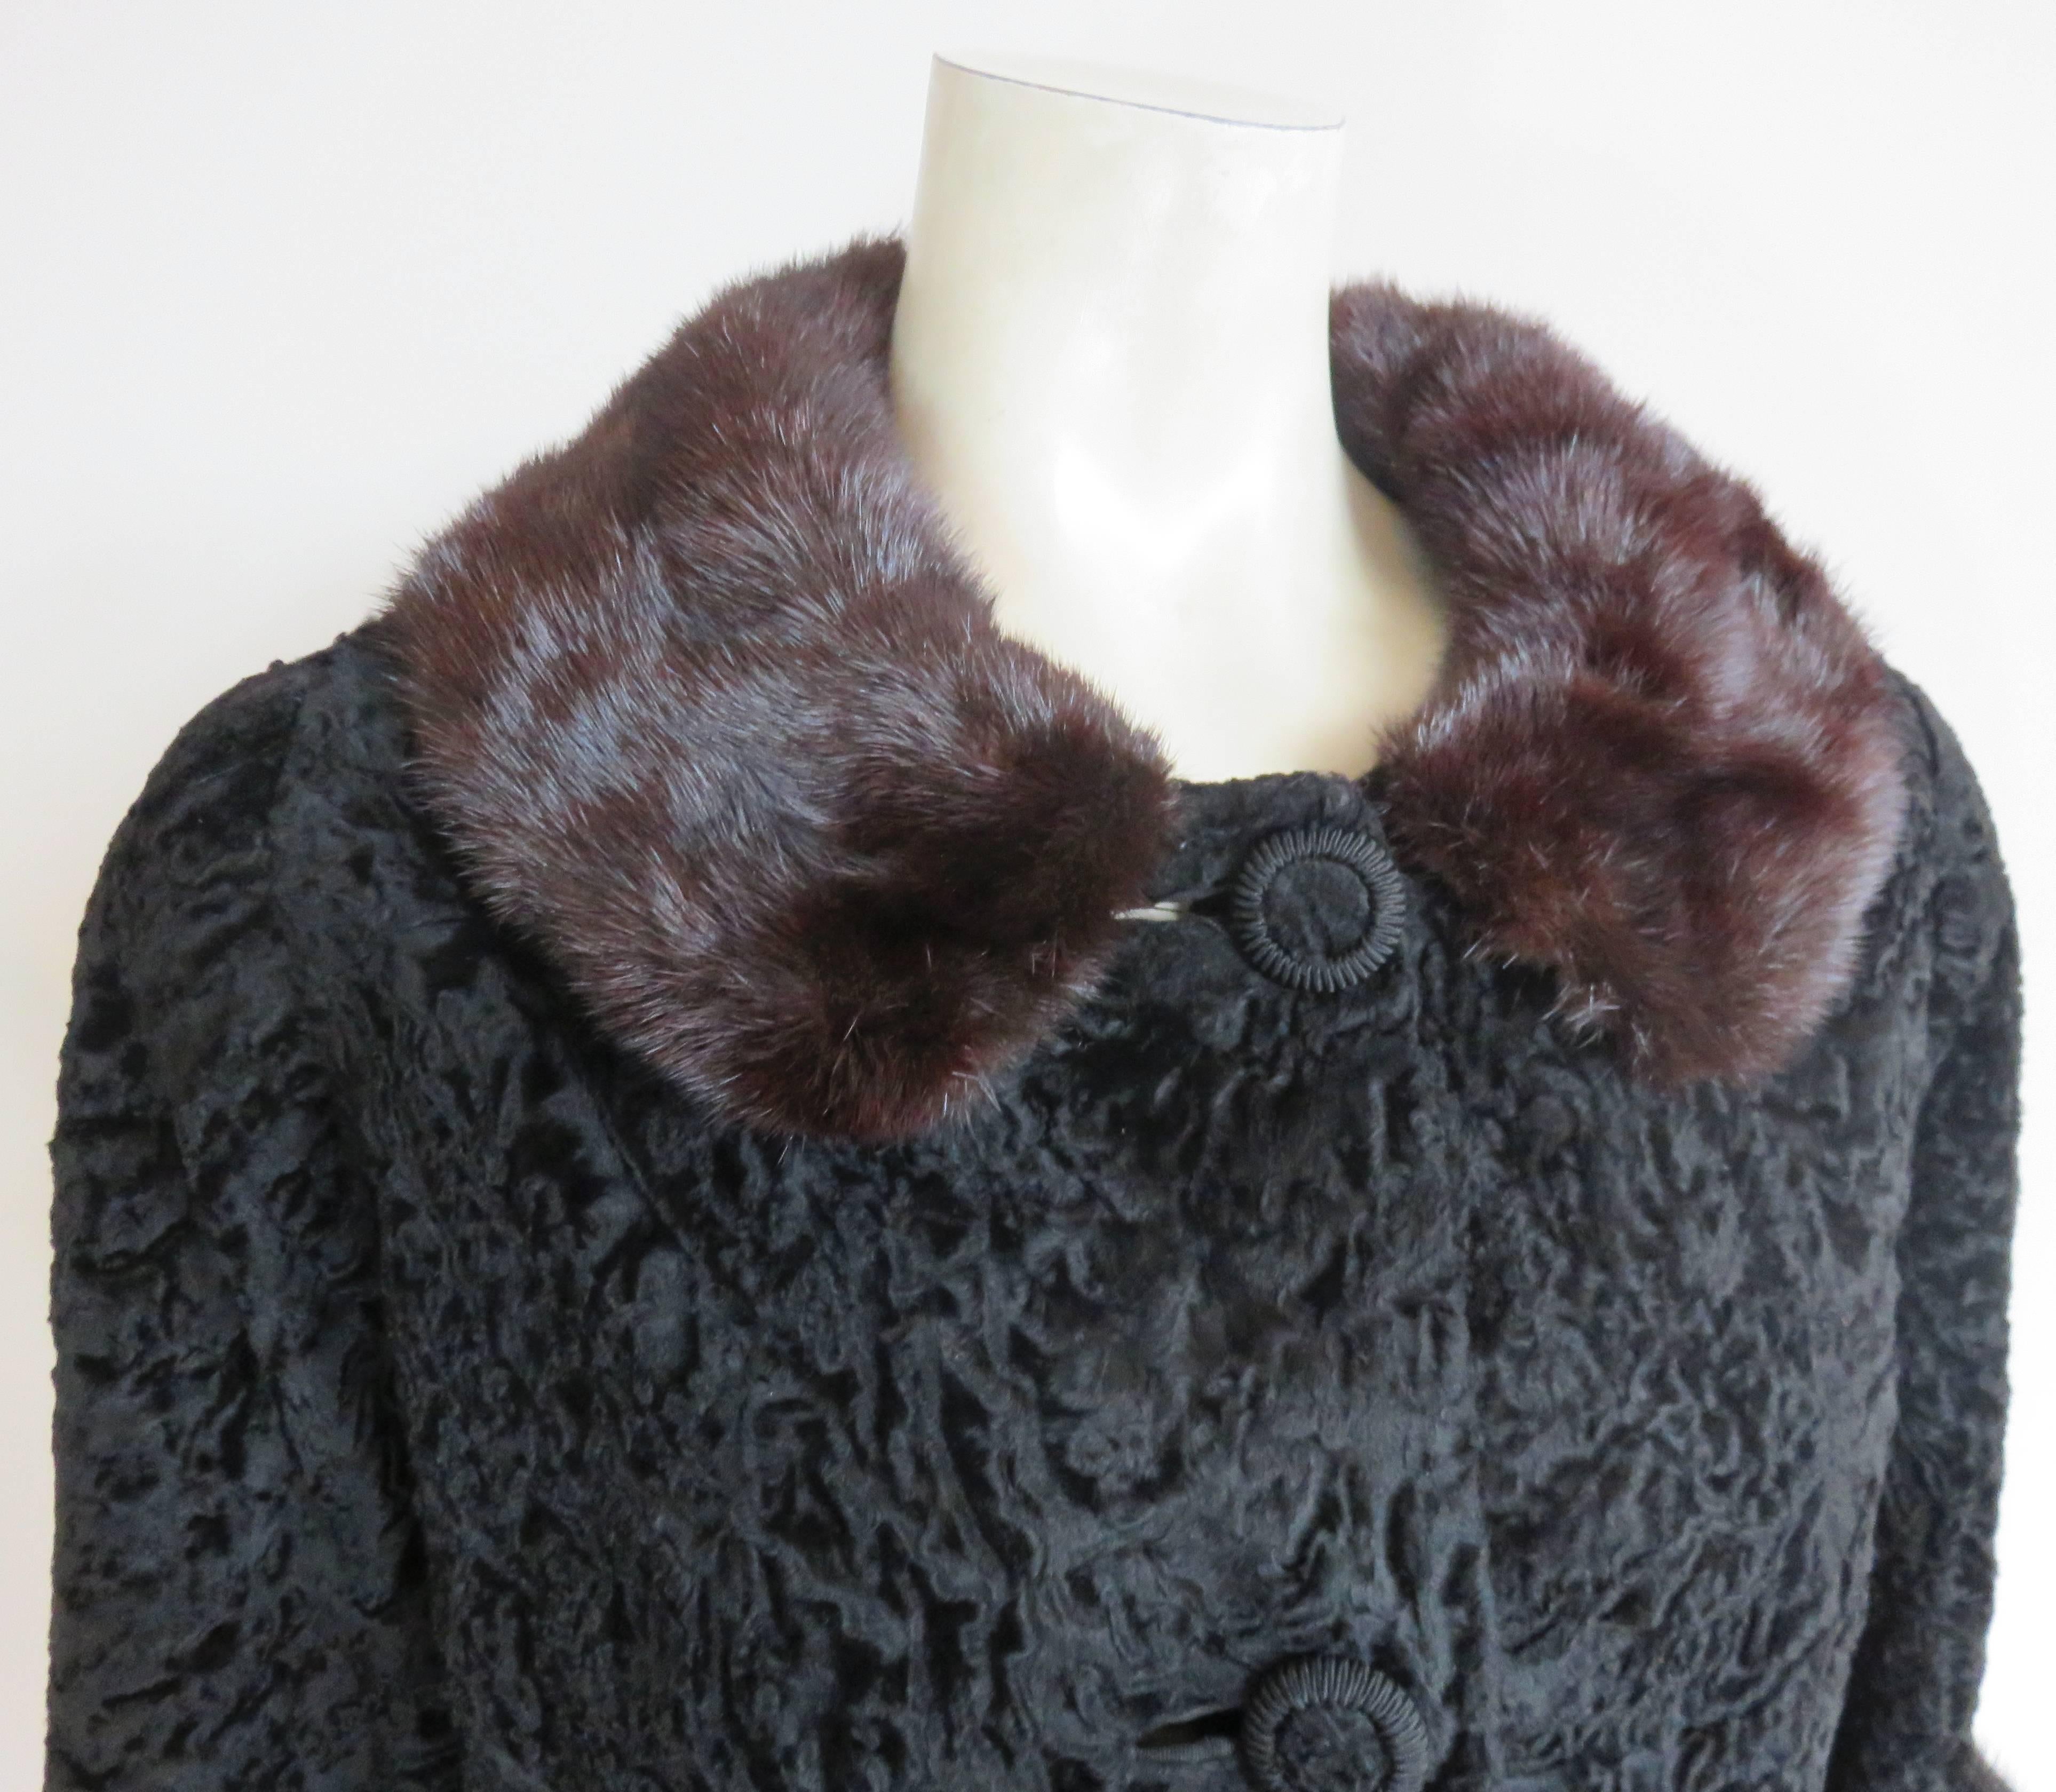 Mint condition 1960's BROADTAIL & MINK FUR JACKET.

Luxurious, black broadtail fur body with with generously sized, mink fur collar, and cuffs.

Three-quarter length sleeves with braided button detailing.

Fully lined, and in excellent